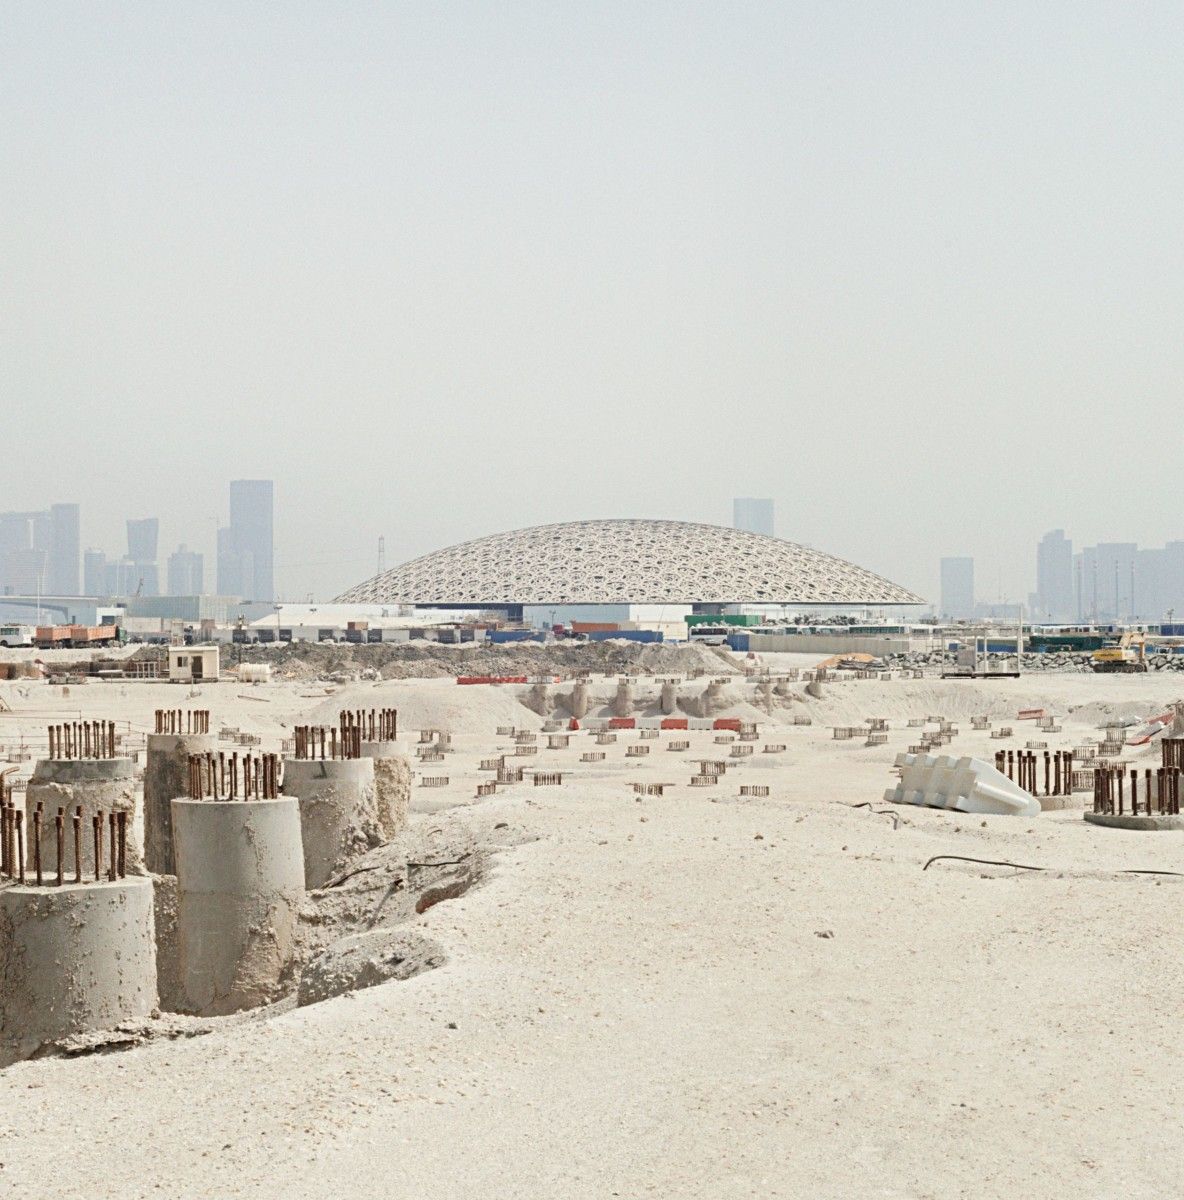 The Louvre Abu Dhabi dome and the site of the Guggenheim’s troubled project. Image by Knut Egil Wang. UAE, 2016